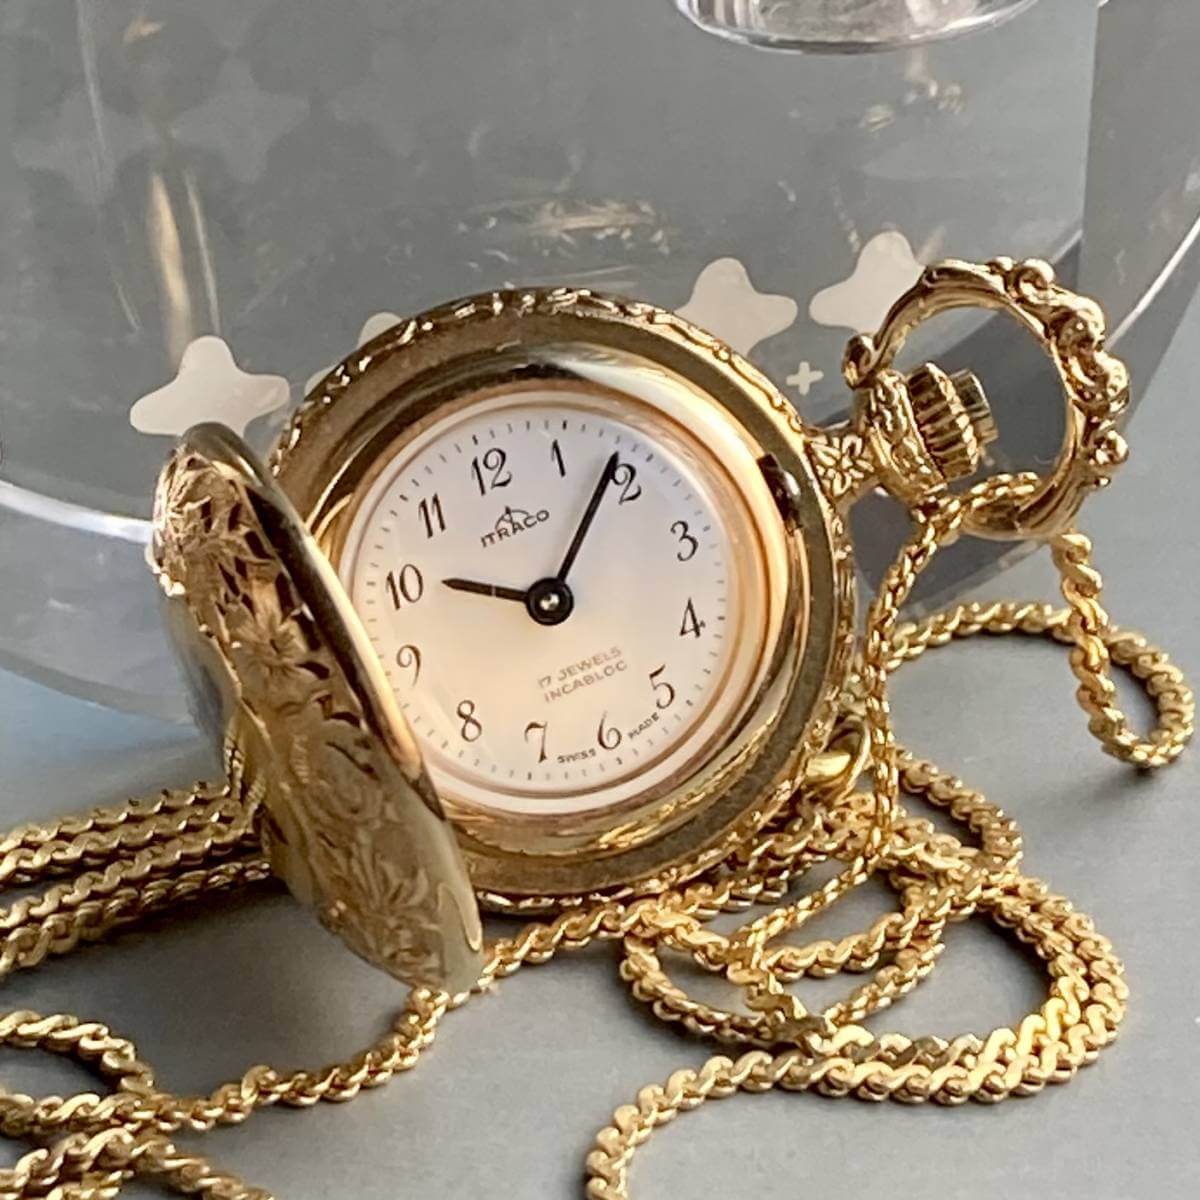 Itraco Pocket Watch Pendant Watch with Chain Antique 22mm - Murphy Johnson Watches Co.